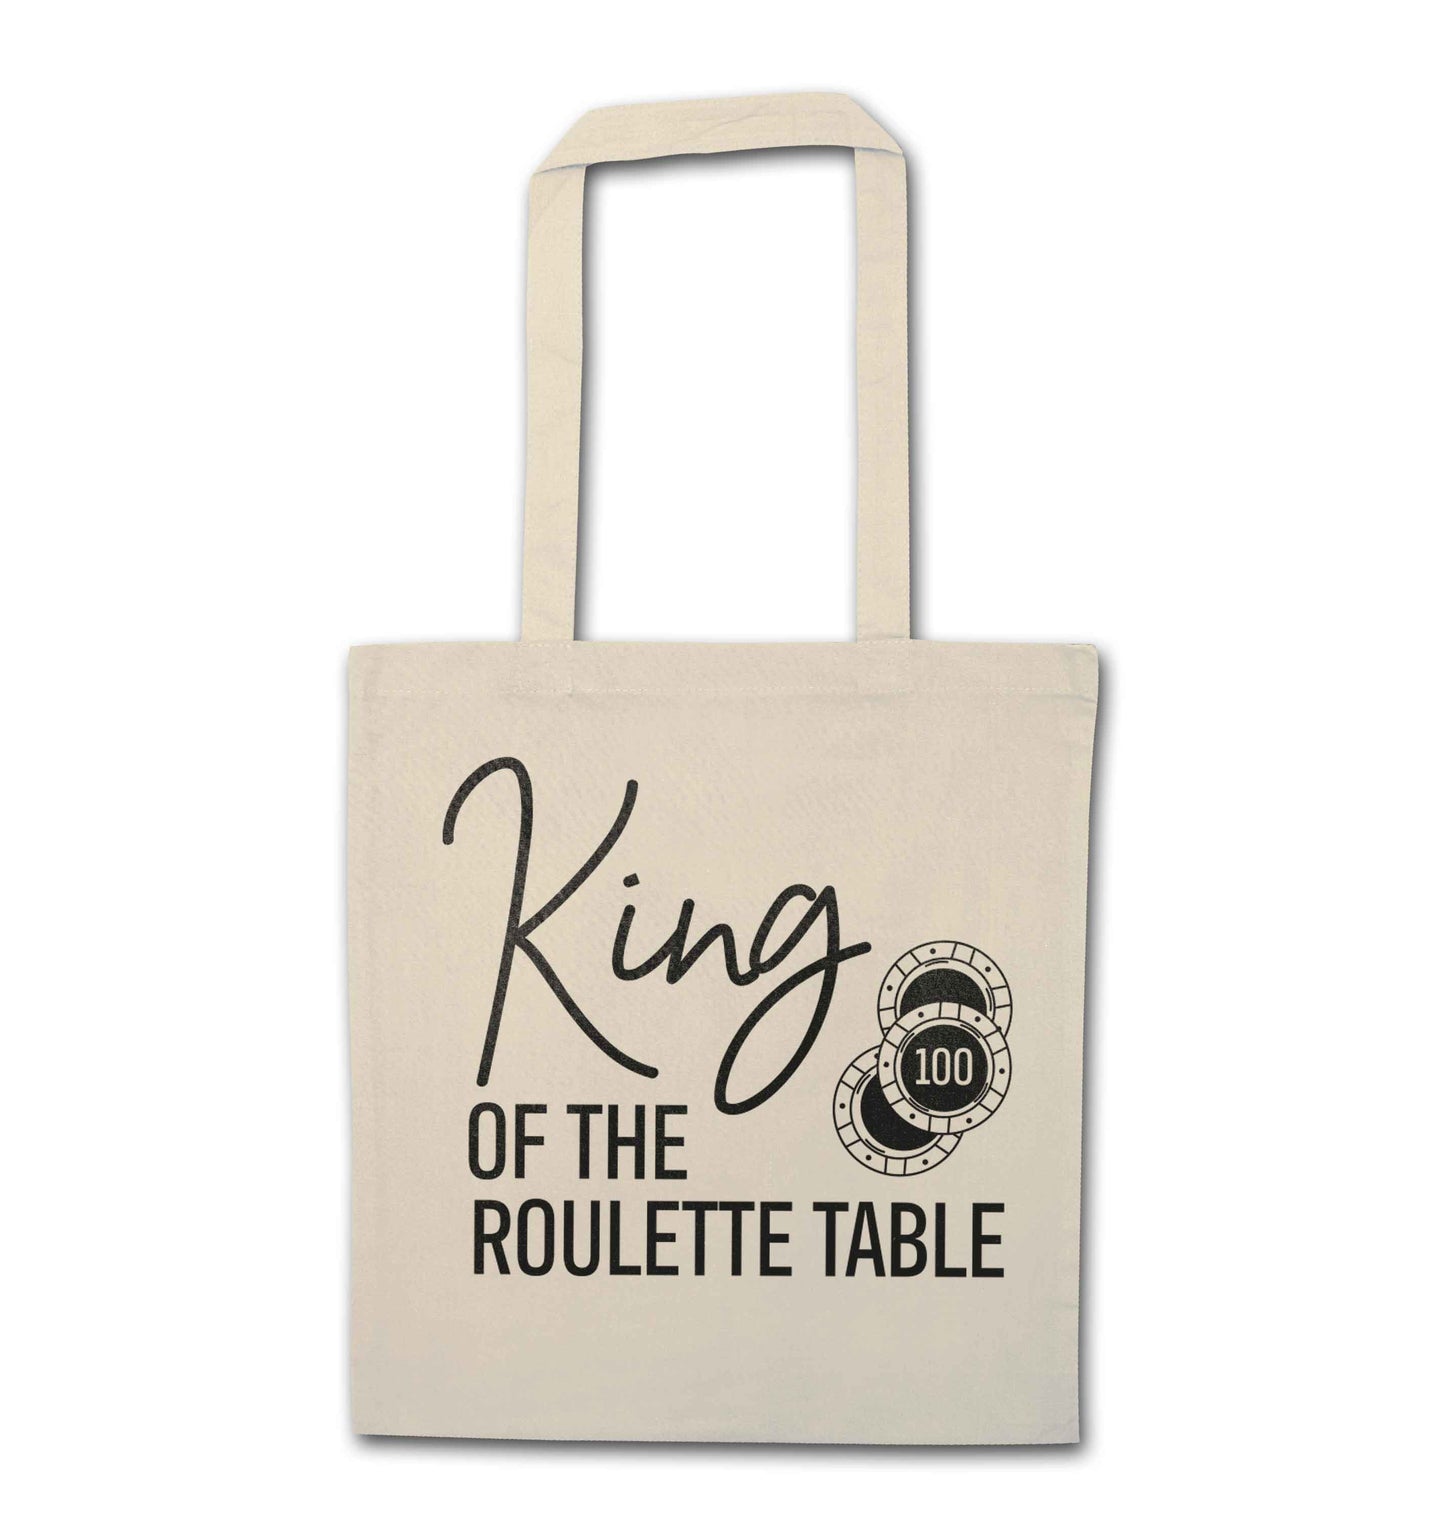 King of the roulette table natural tote bag